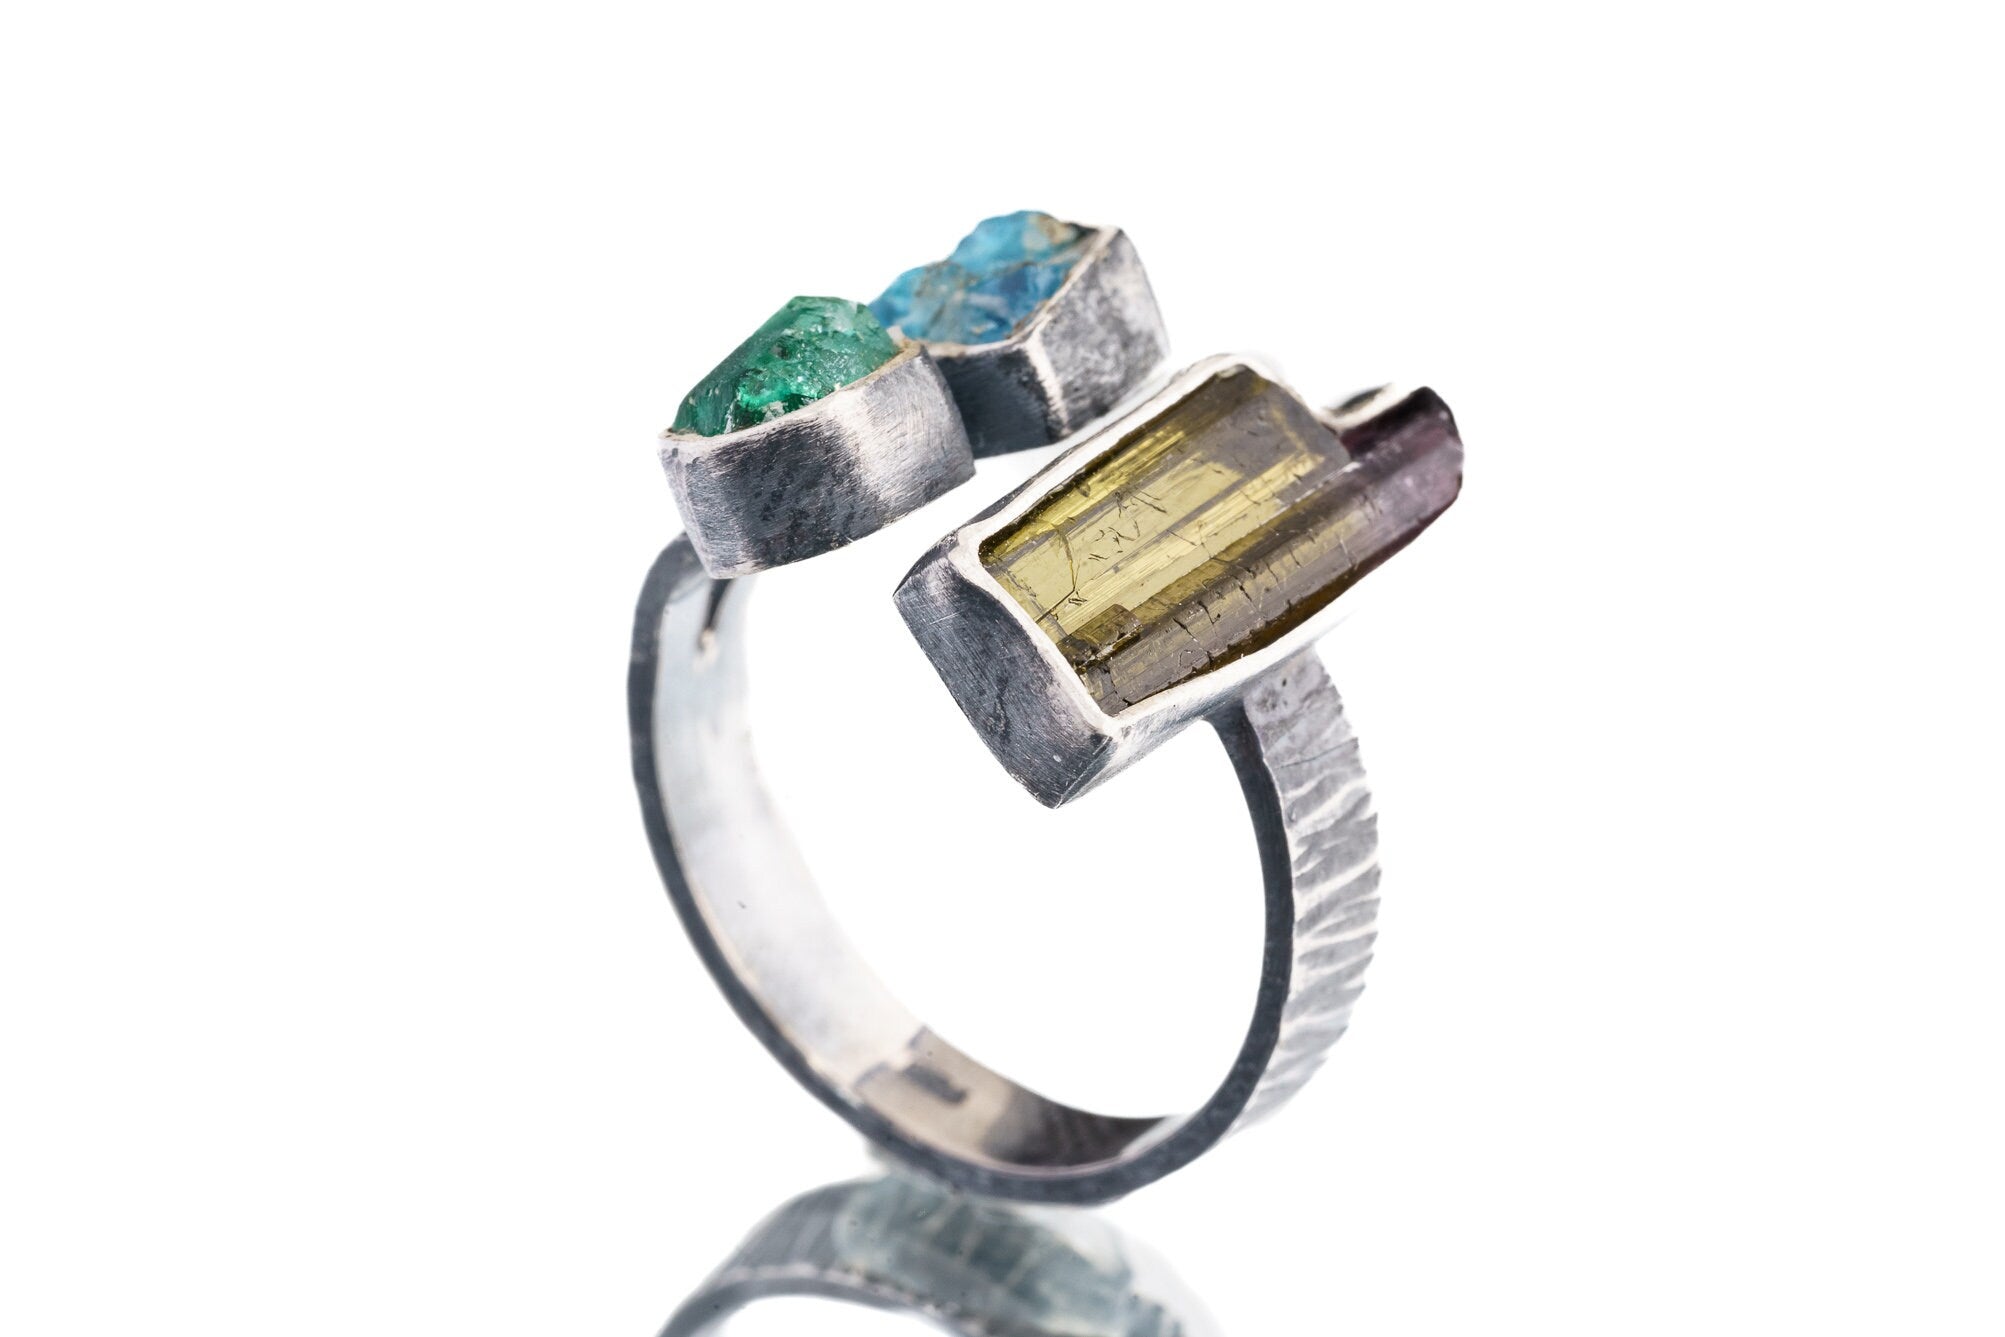 Smoky Quartz, Emerald & Apatite - 925 Sterling Silver - Multi Stone - Textured, Oxidised - Open Ring Band - Adjustable US 6 - 10 - NO/15